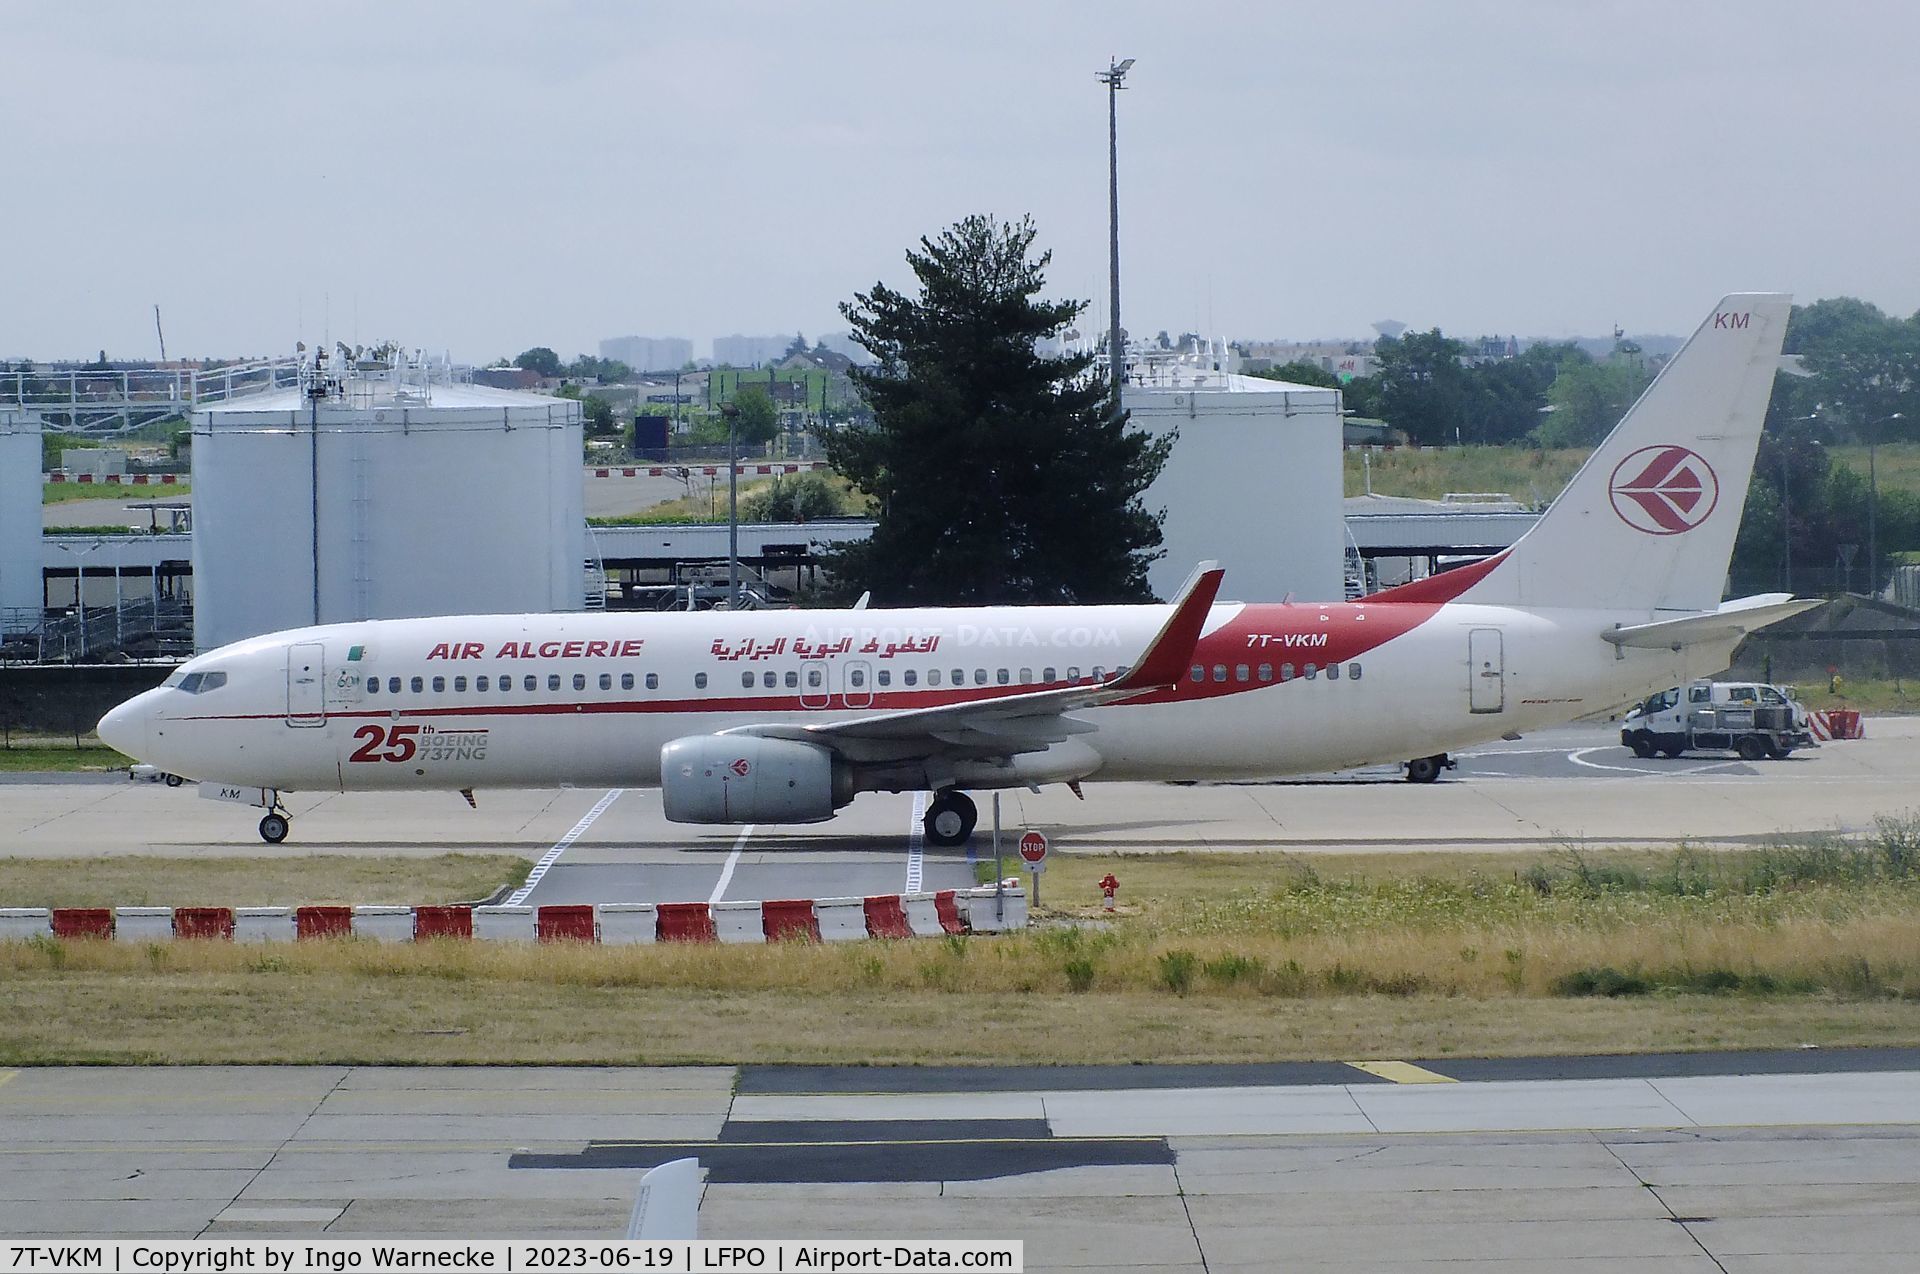 7T-VKM, 2016 Boeing 737-8D6 C/N 60749, Boeing 737-8D6 of Air Algerie at Paris/Orly airport